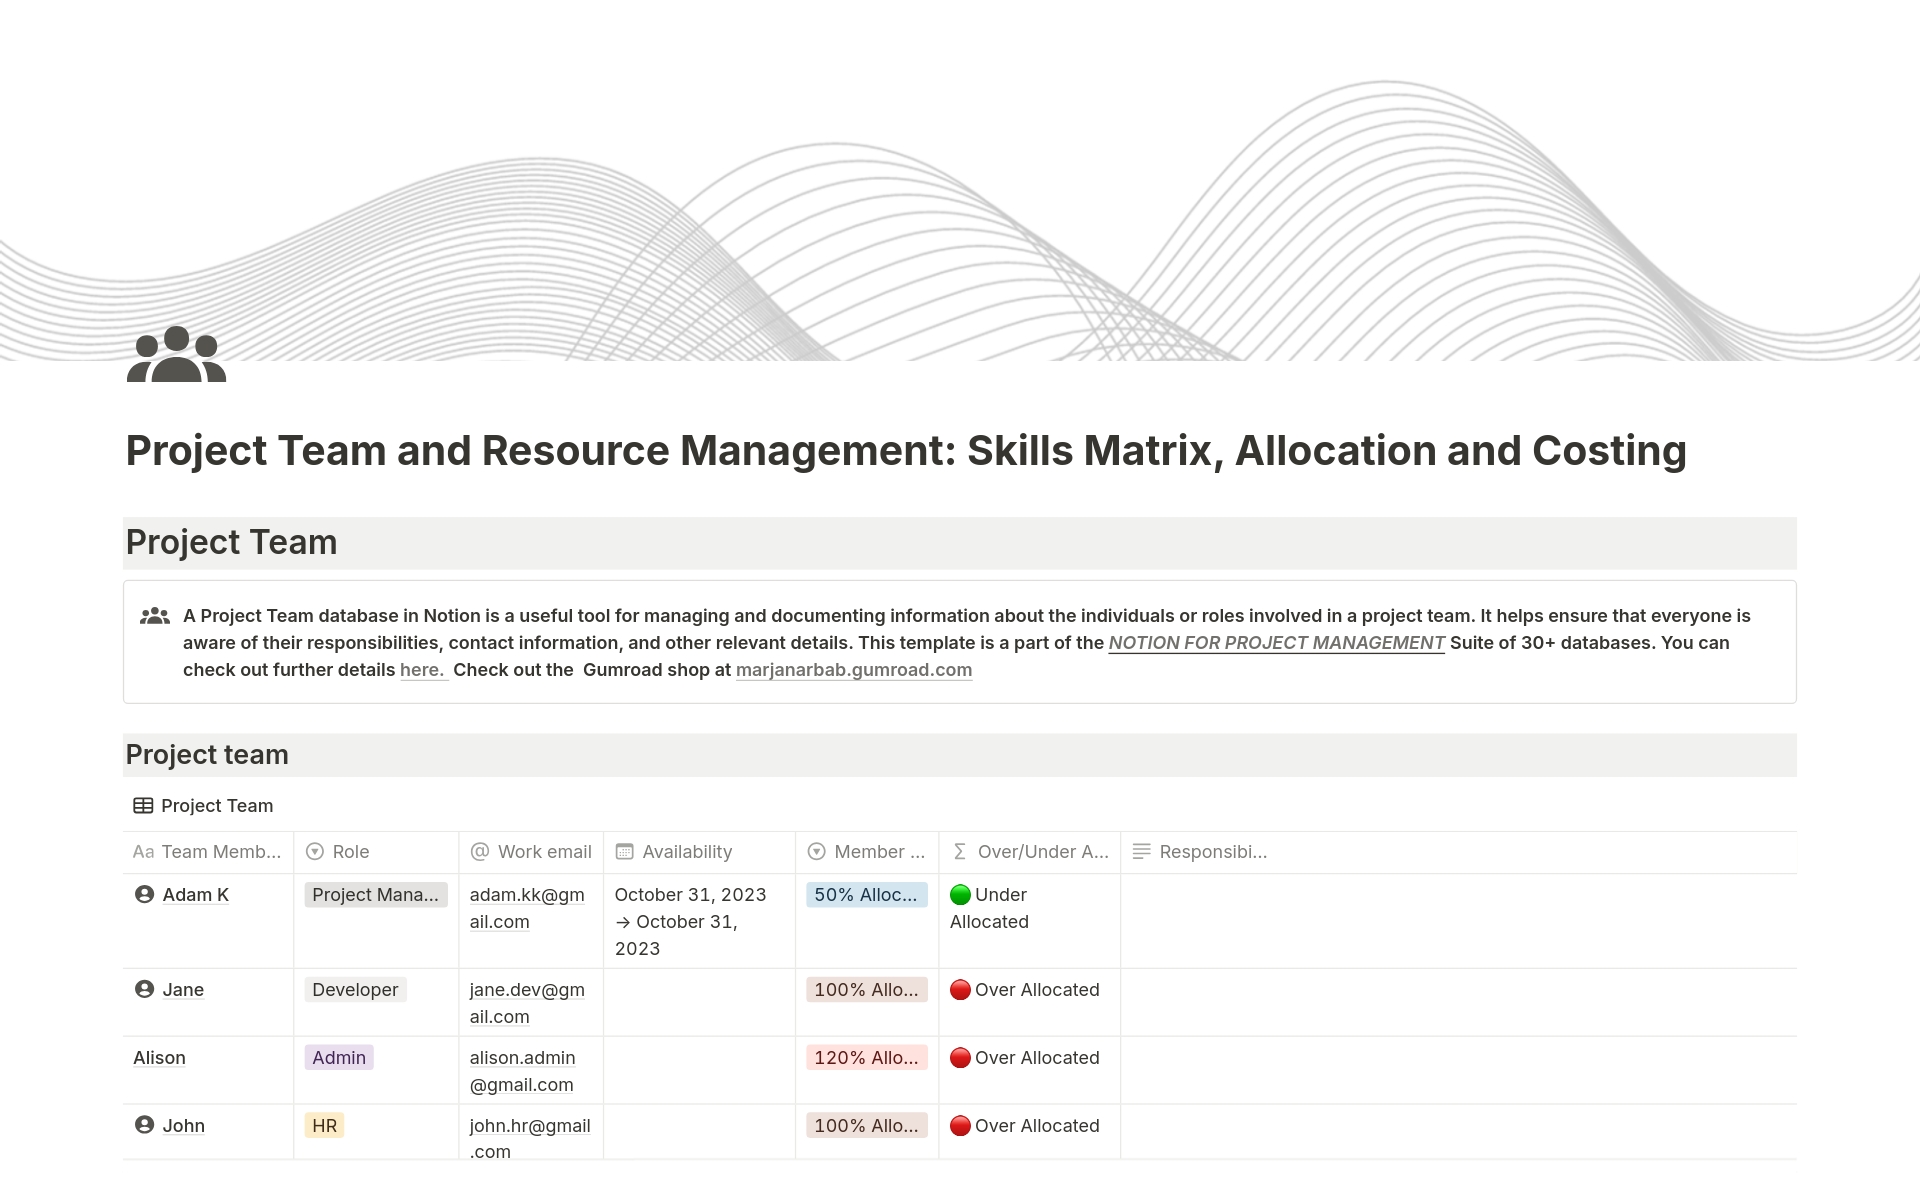  Perfect for project managers handling both waterfall and scrum projects, this comprehensive template combines project team management, resource skills matrix, and resource costing into one powerful tool.